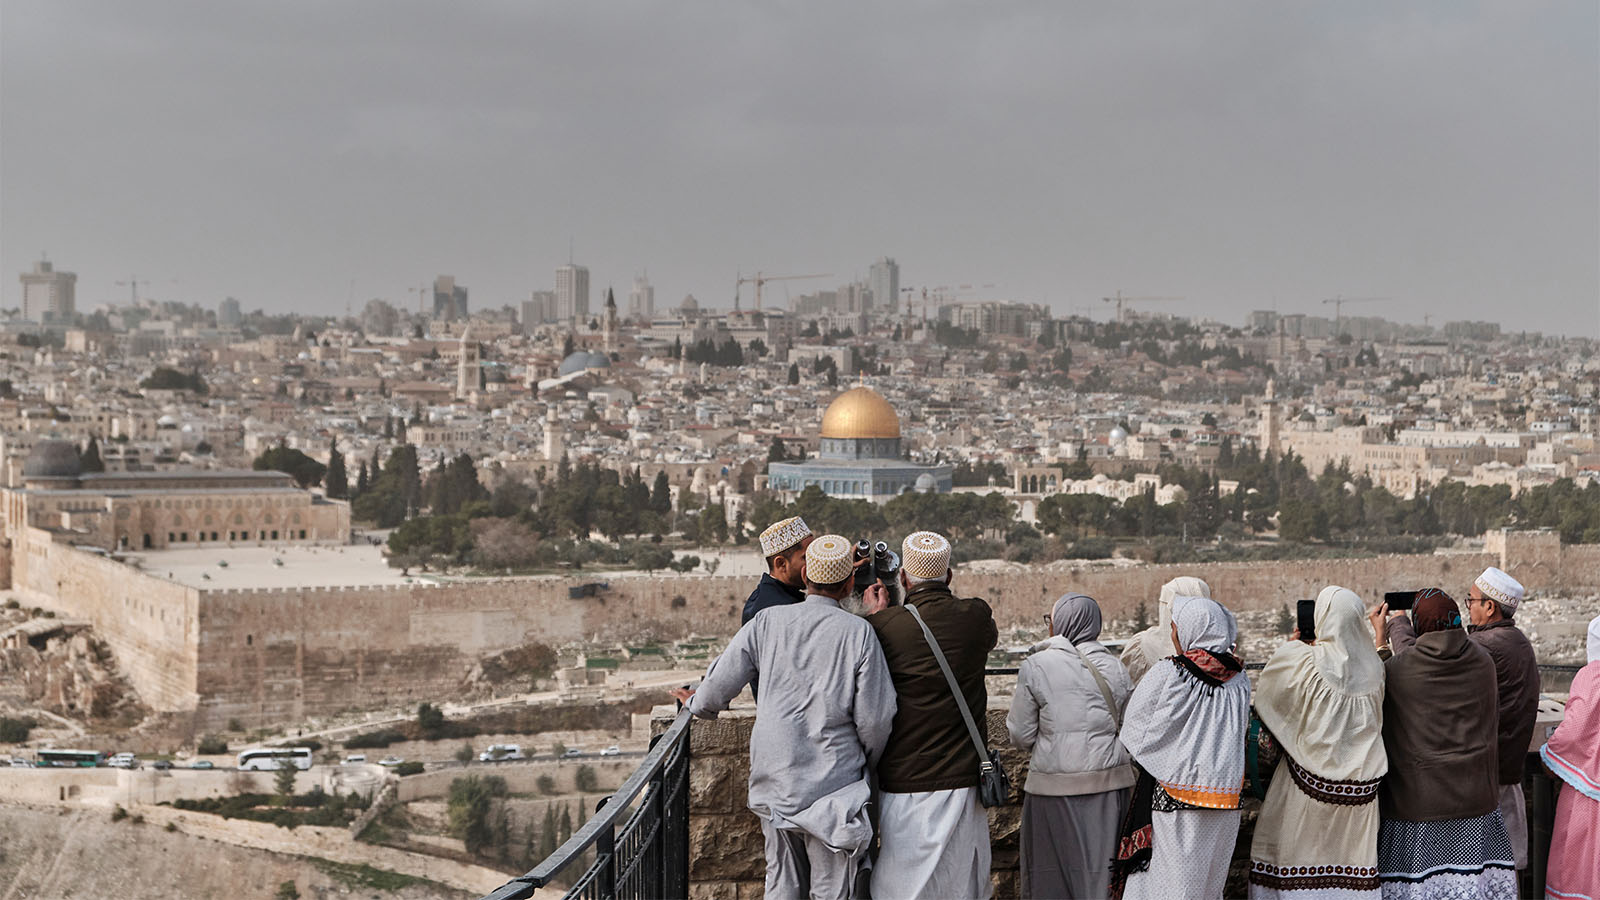 Lookout over Al-Aqsa from the Mount of Olives (Photo: Shutterstock)